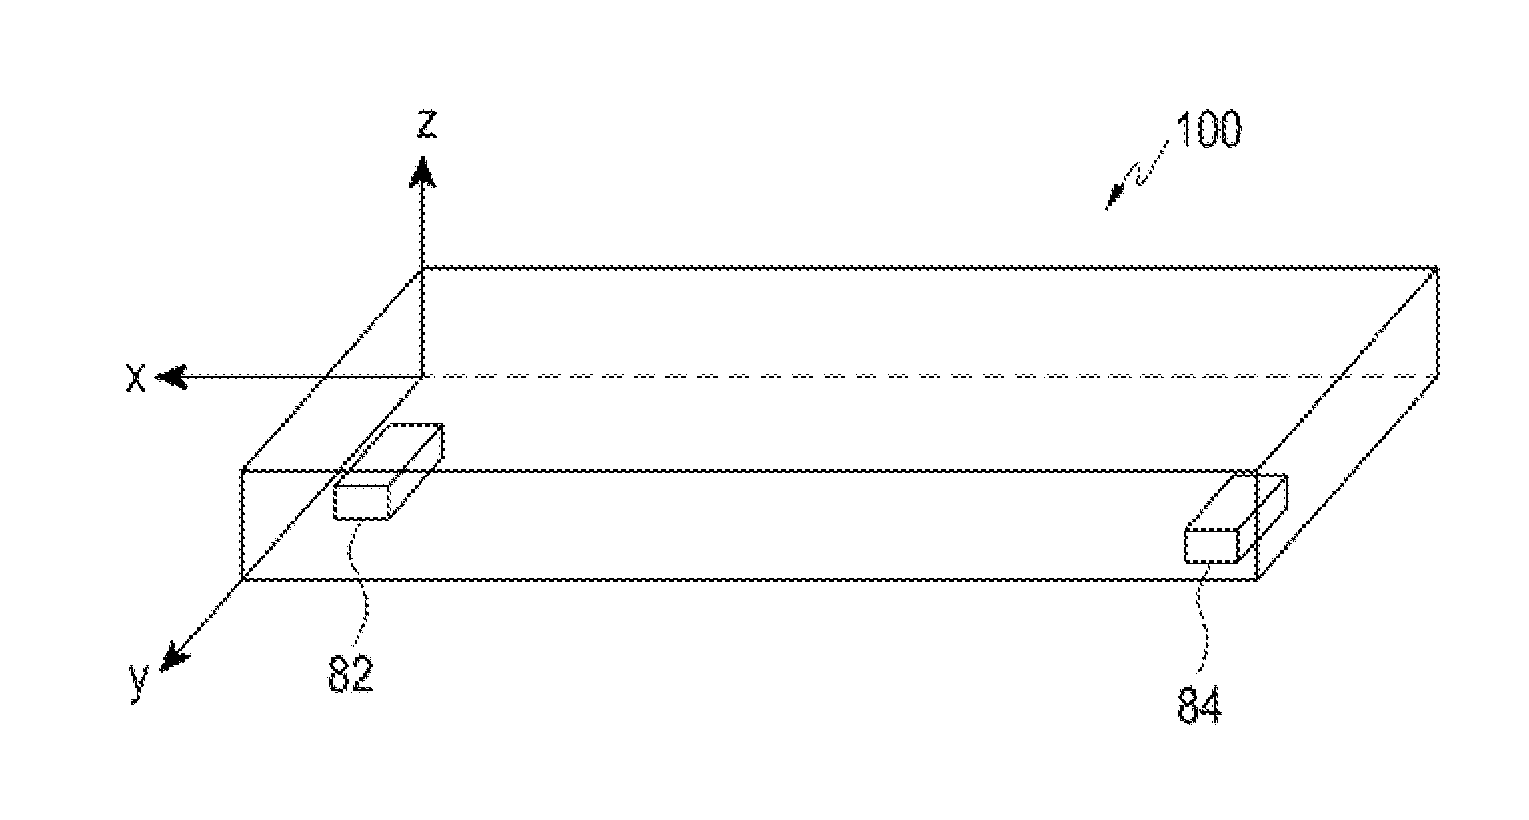 Apparatus and method for generating vibration based on sound characteristics